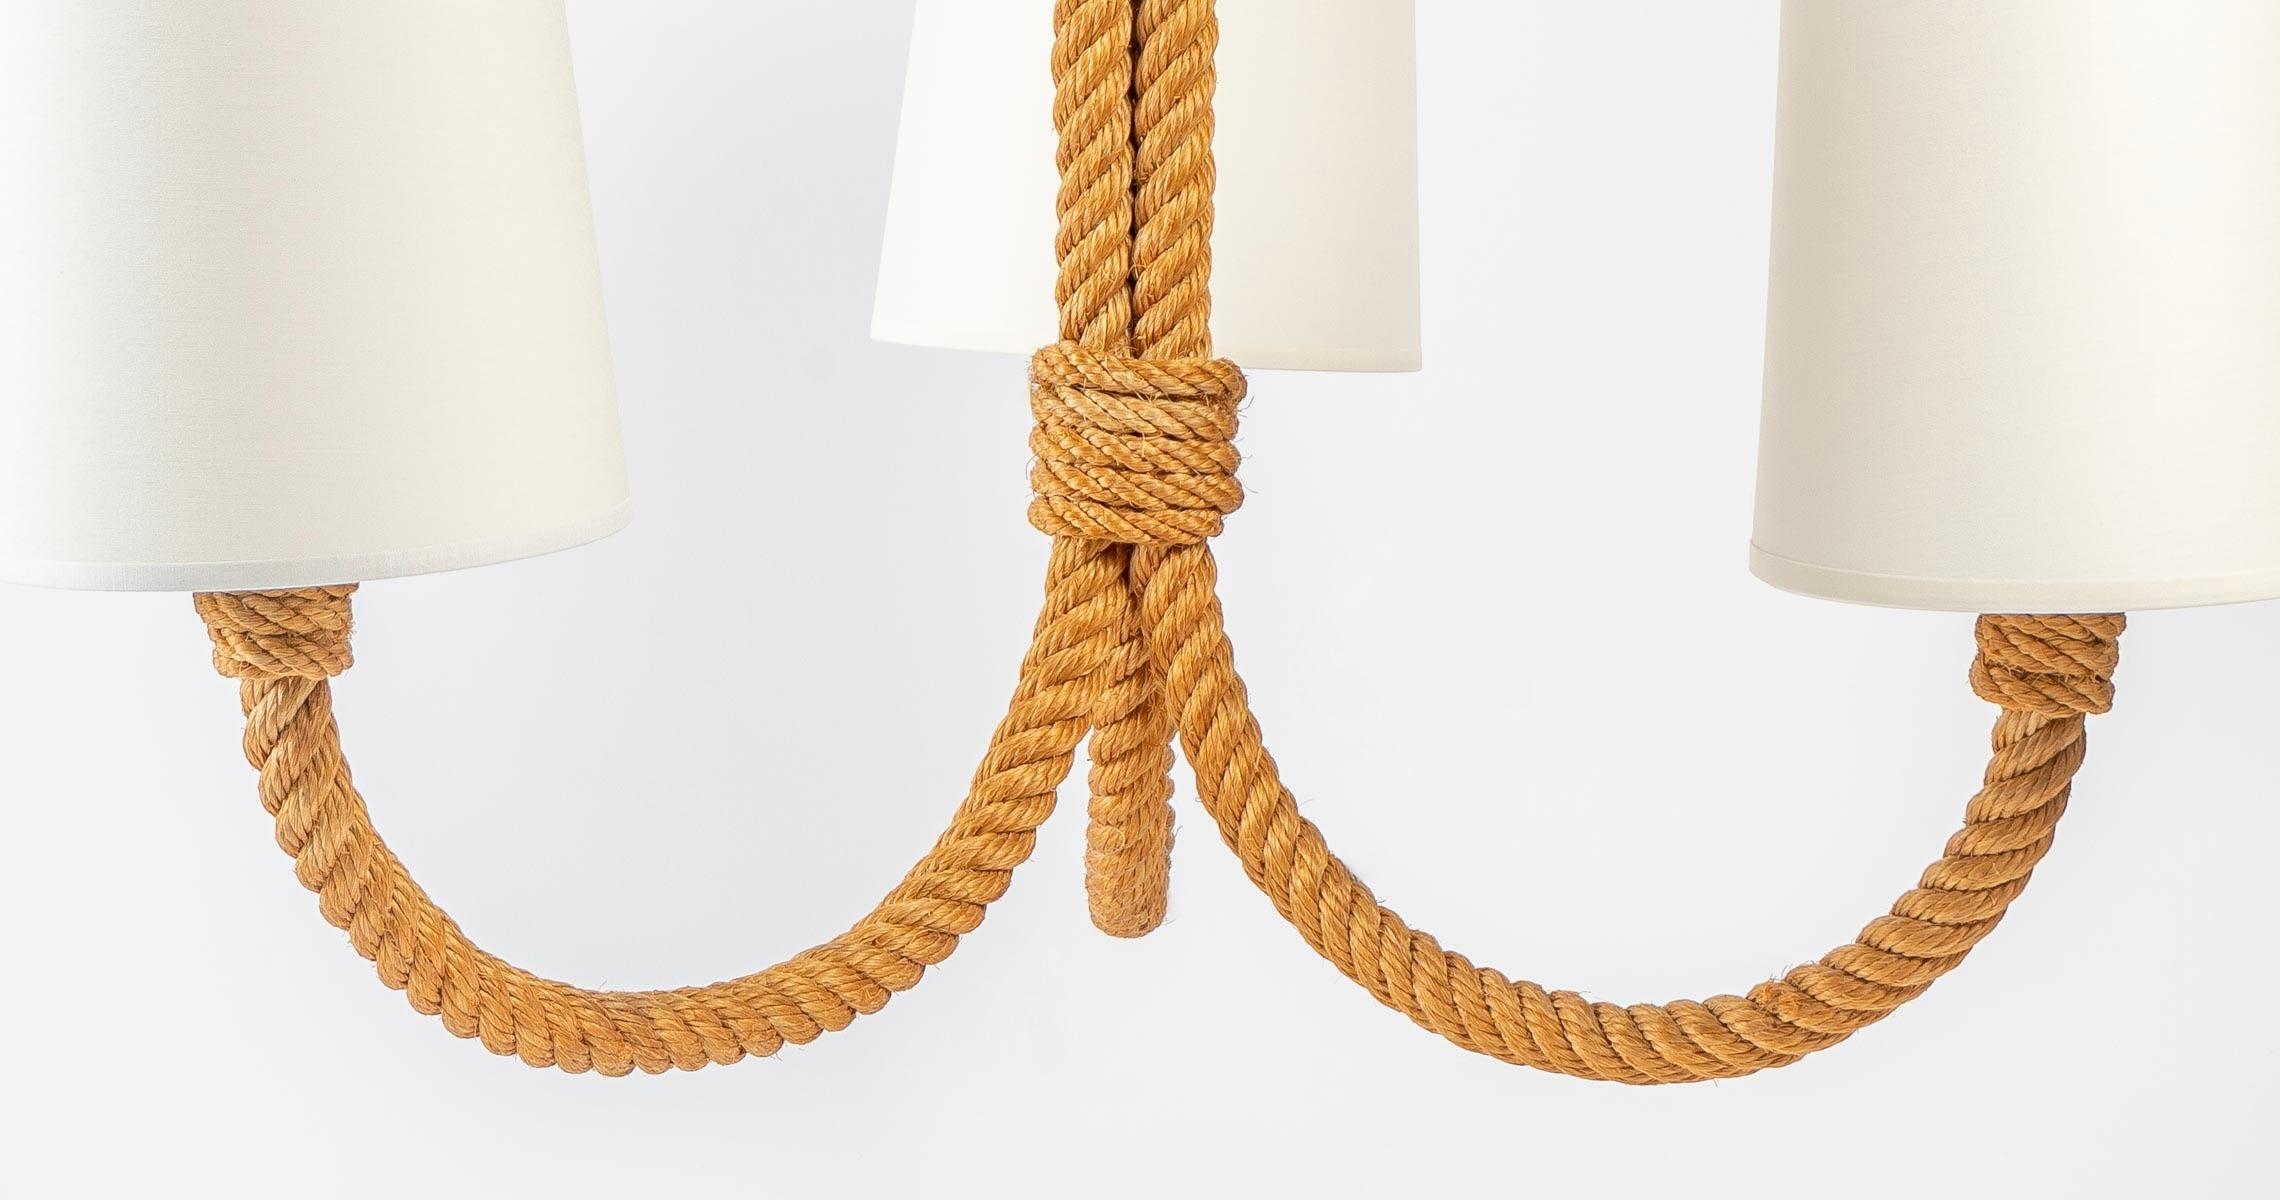 1950 Rope chandelier Adrien Audoux & Frida Minet
The structure of the chandelier has three arms of light going up, they are assembled to form the central stem. On the upper part, the three arms are decorated with three half loops.
Off-white cotton